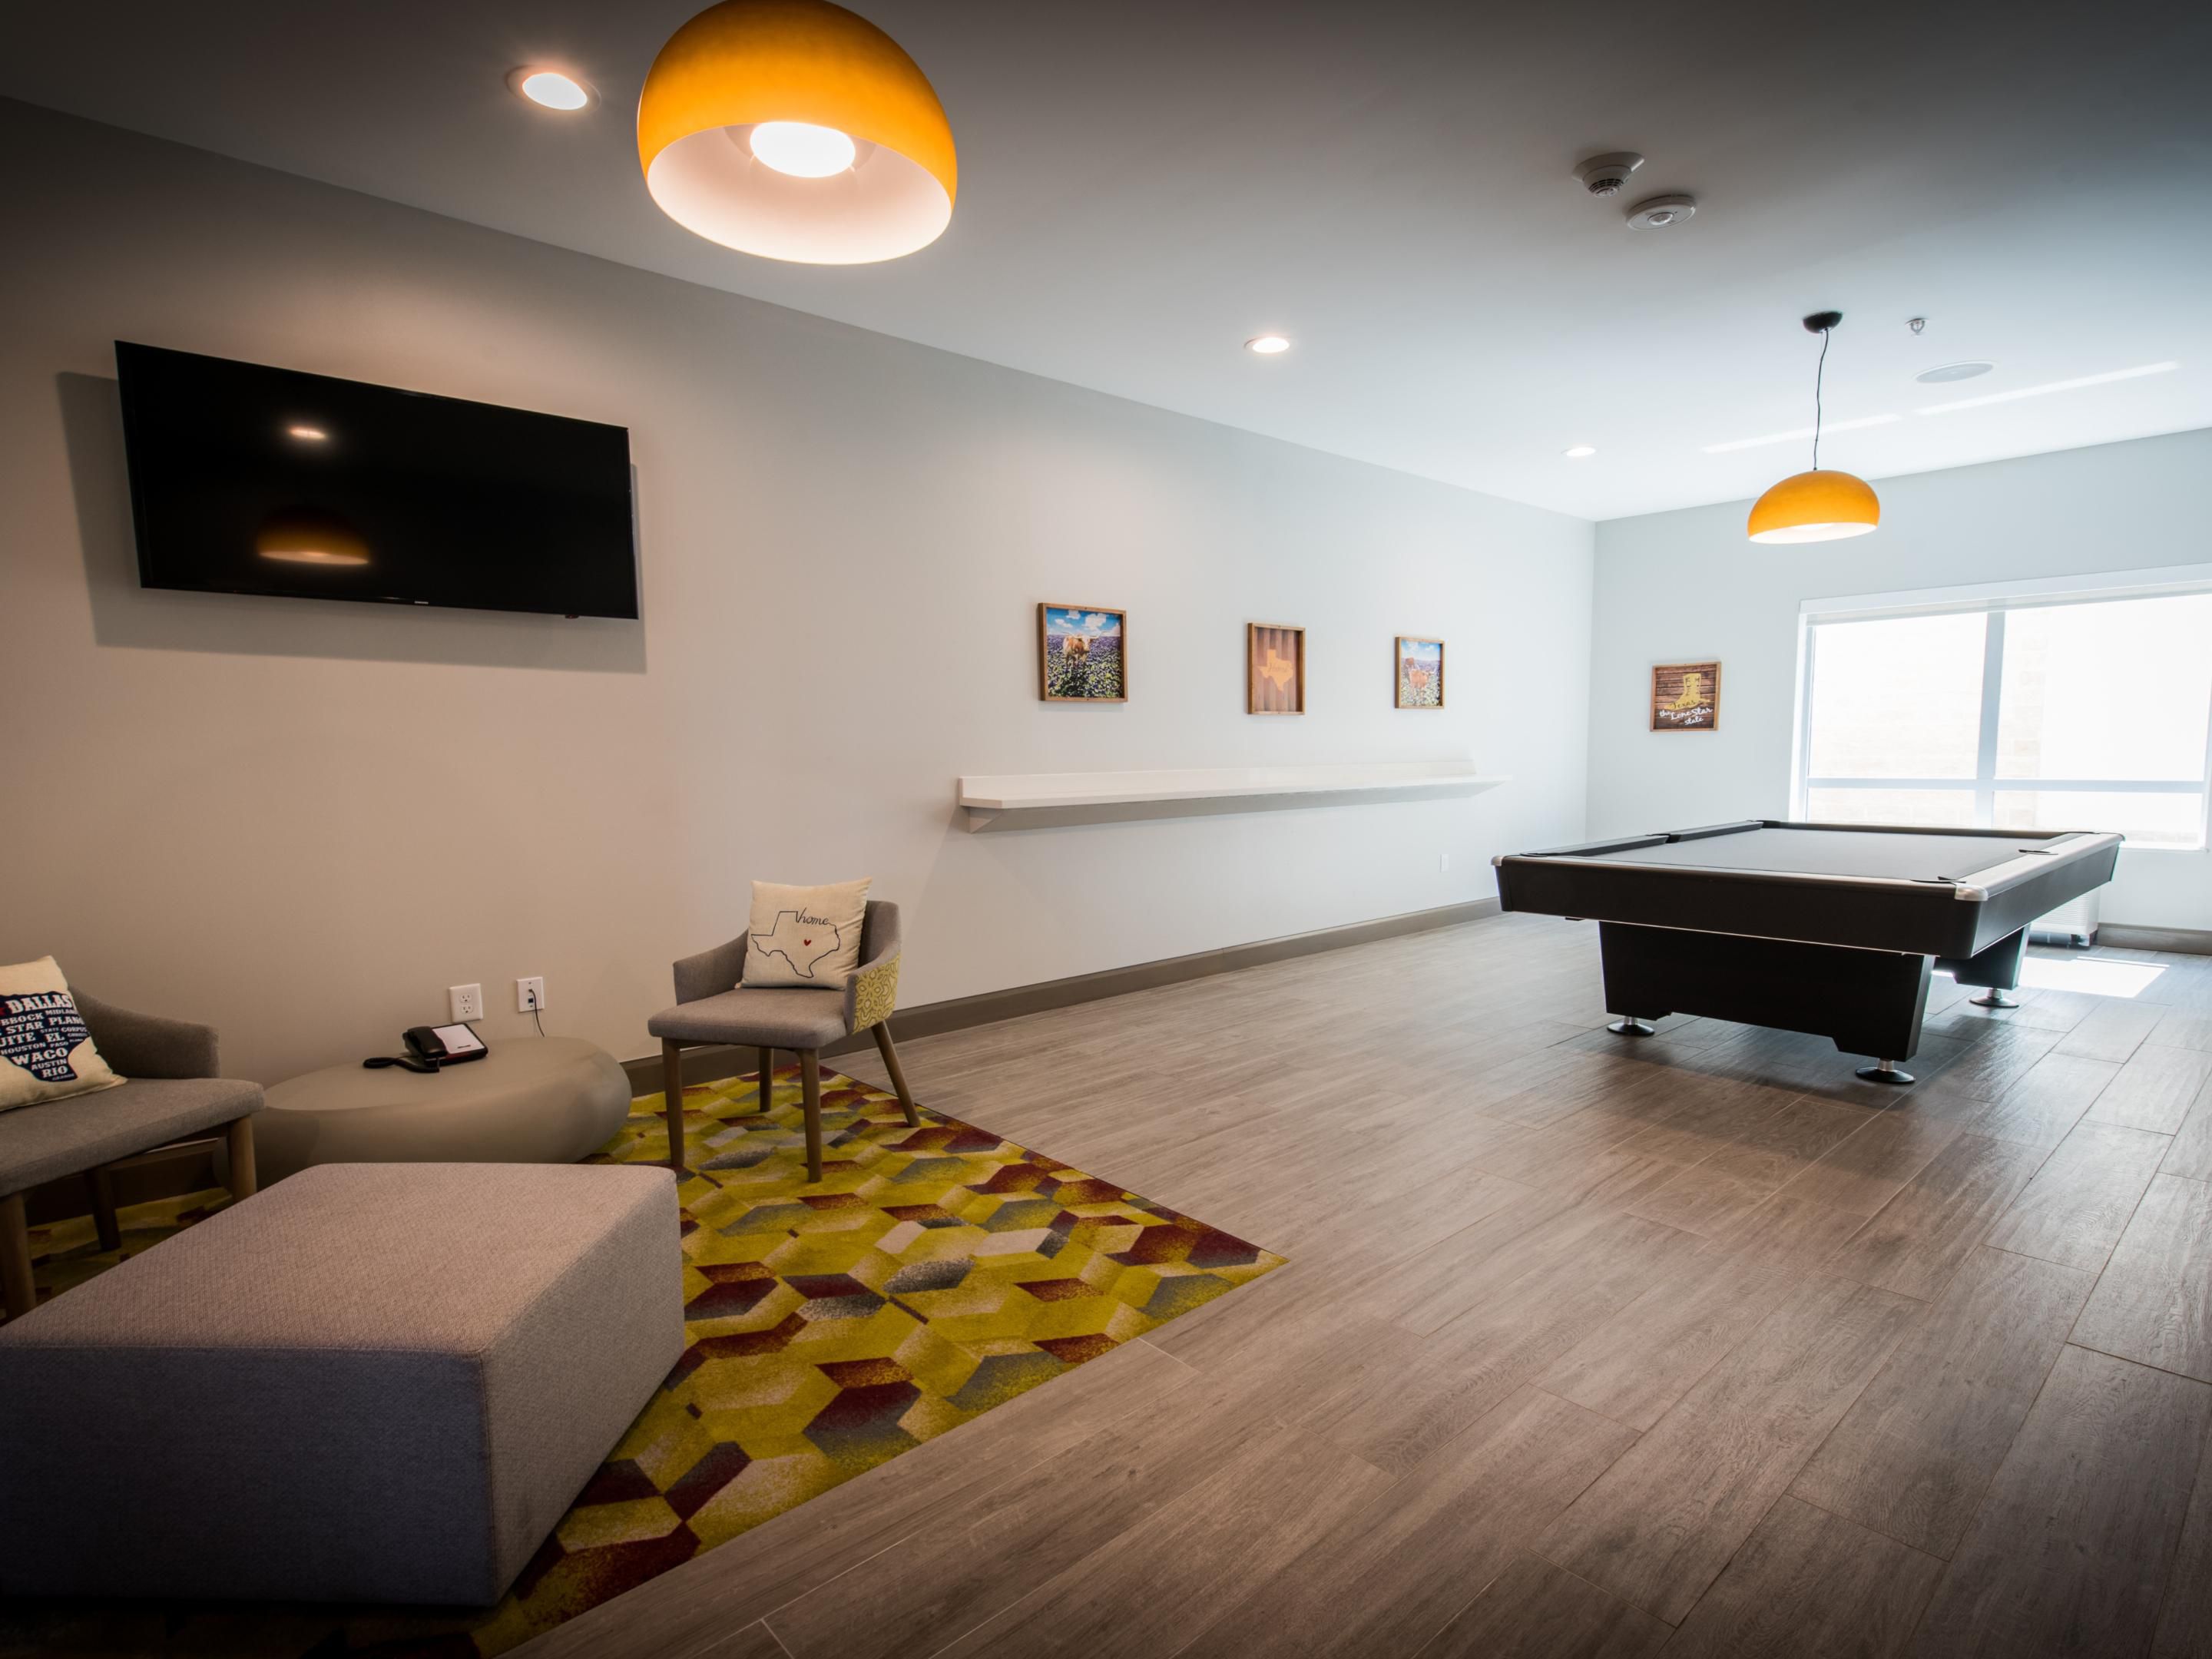 Play a nice billiards game in a more intimate setting. Our entertainment room is a cozy private area with 2-TV screens to watch any game while enjoying a billiards game! 